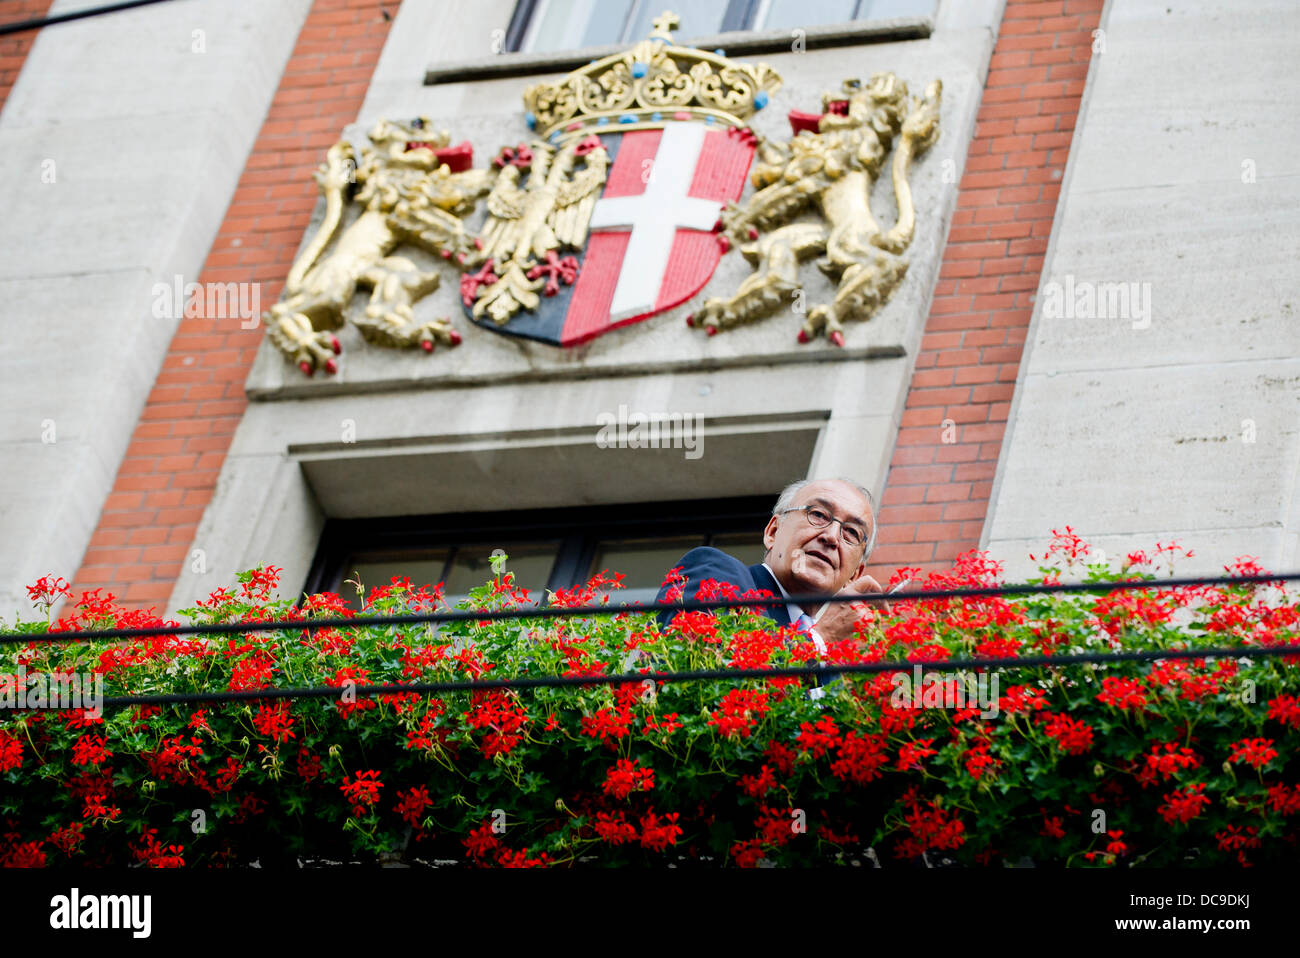 Mayor of Neuss Herbert Napp smokes on the balcony outside his office in city hall in Neuss, Germany, 13 August 2013. Napp is planning to challenge an official order that prohibits him from smoking in his office. Photo: JAN-PHILIPP STROBEL Stock Photo